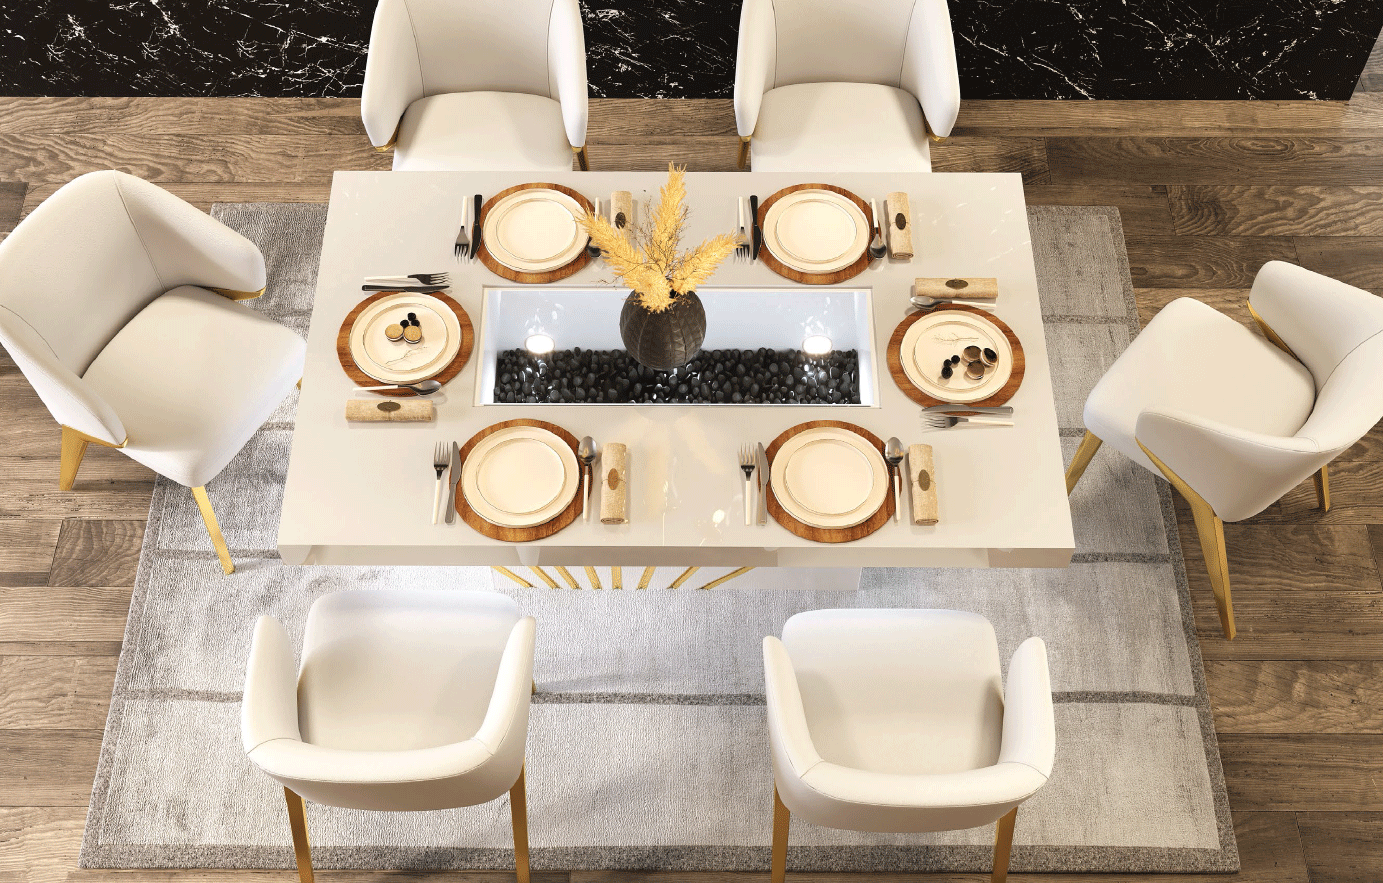 Brands Franco Kora Dining and Wall Units, Spain Oro White Dining room Additional Items